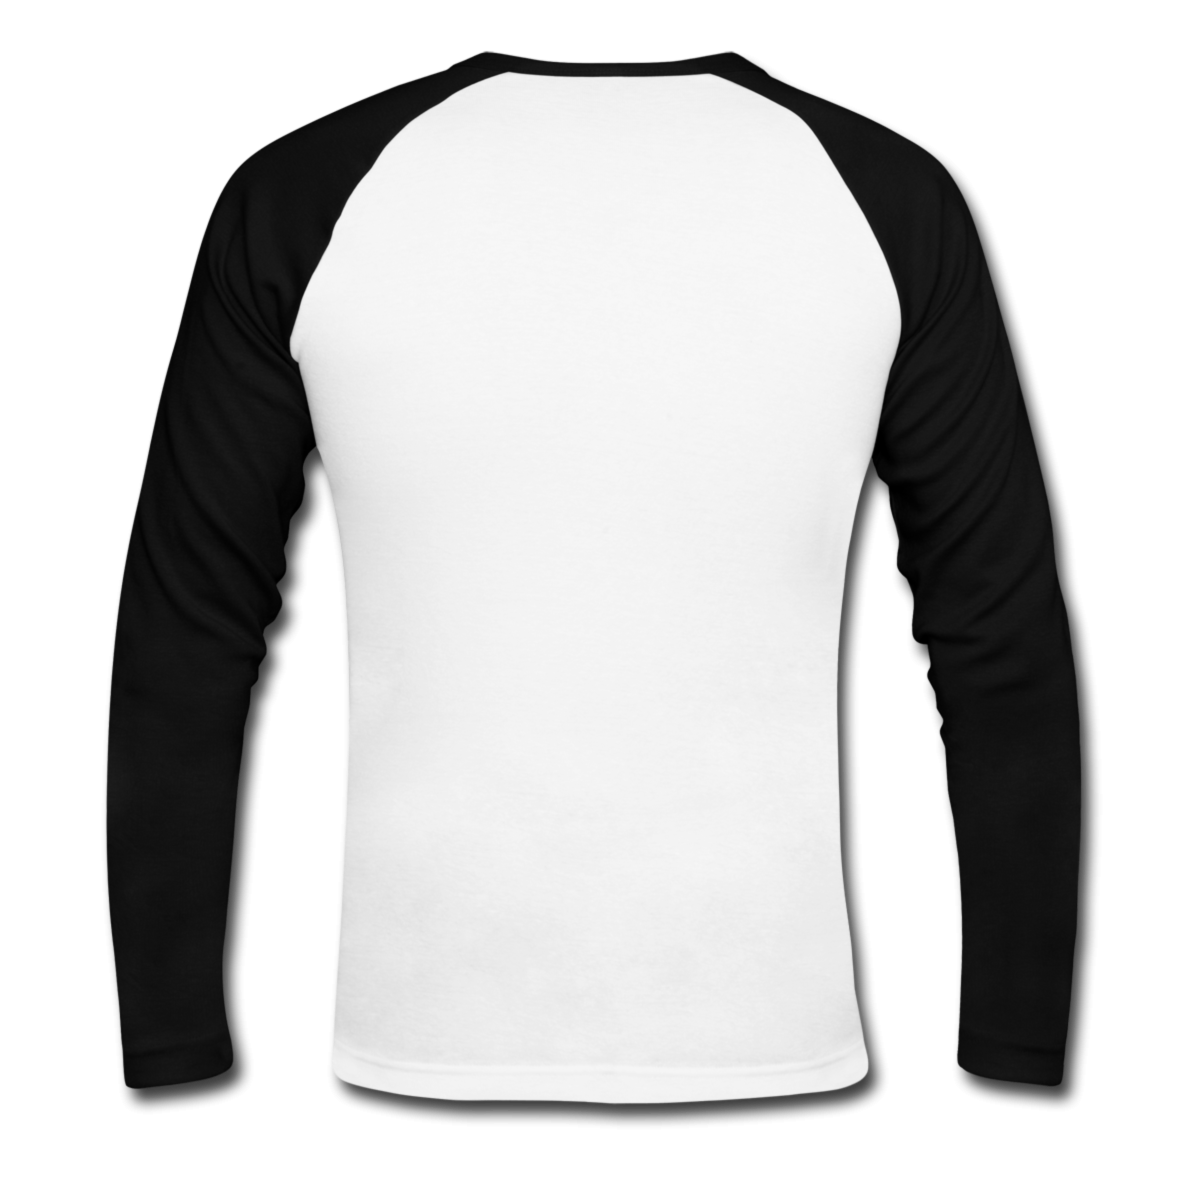 free-blank-t-shirt-download-free-blank-t-shirt-png-images-free